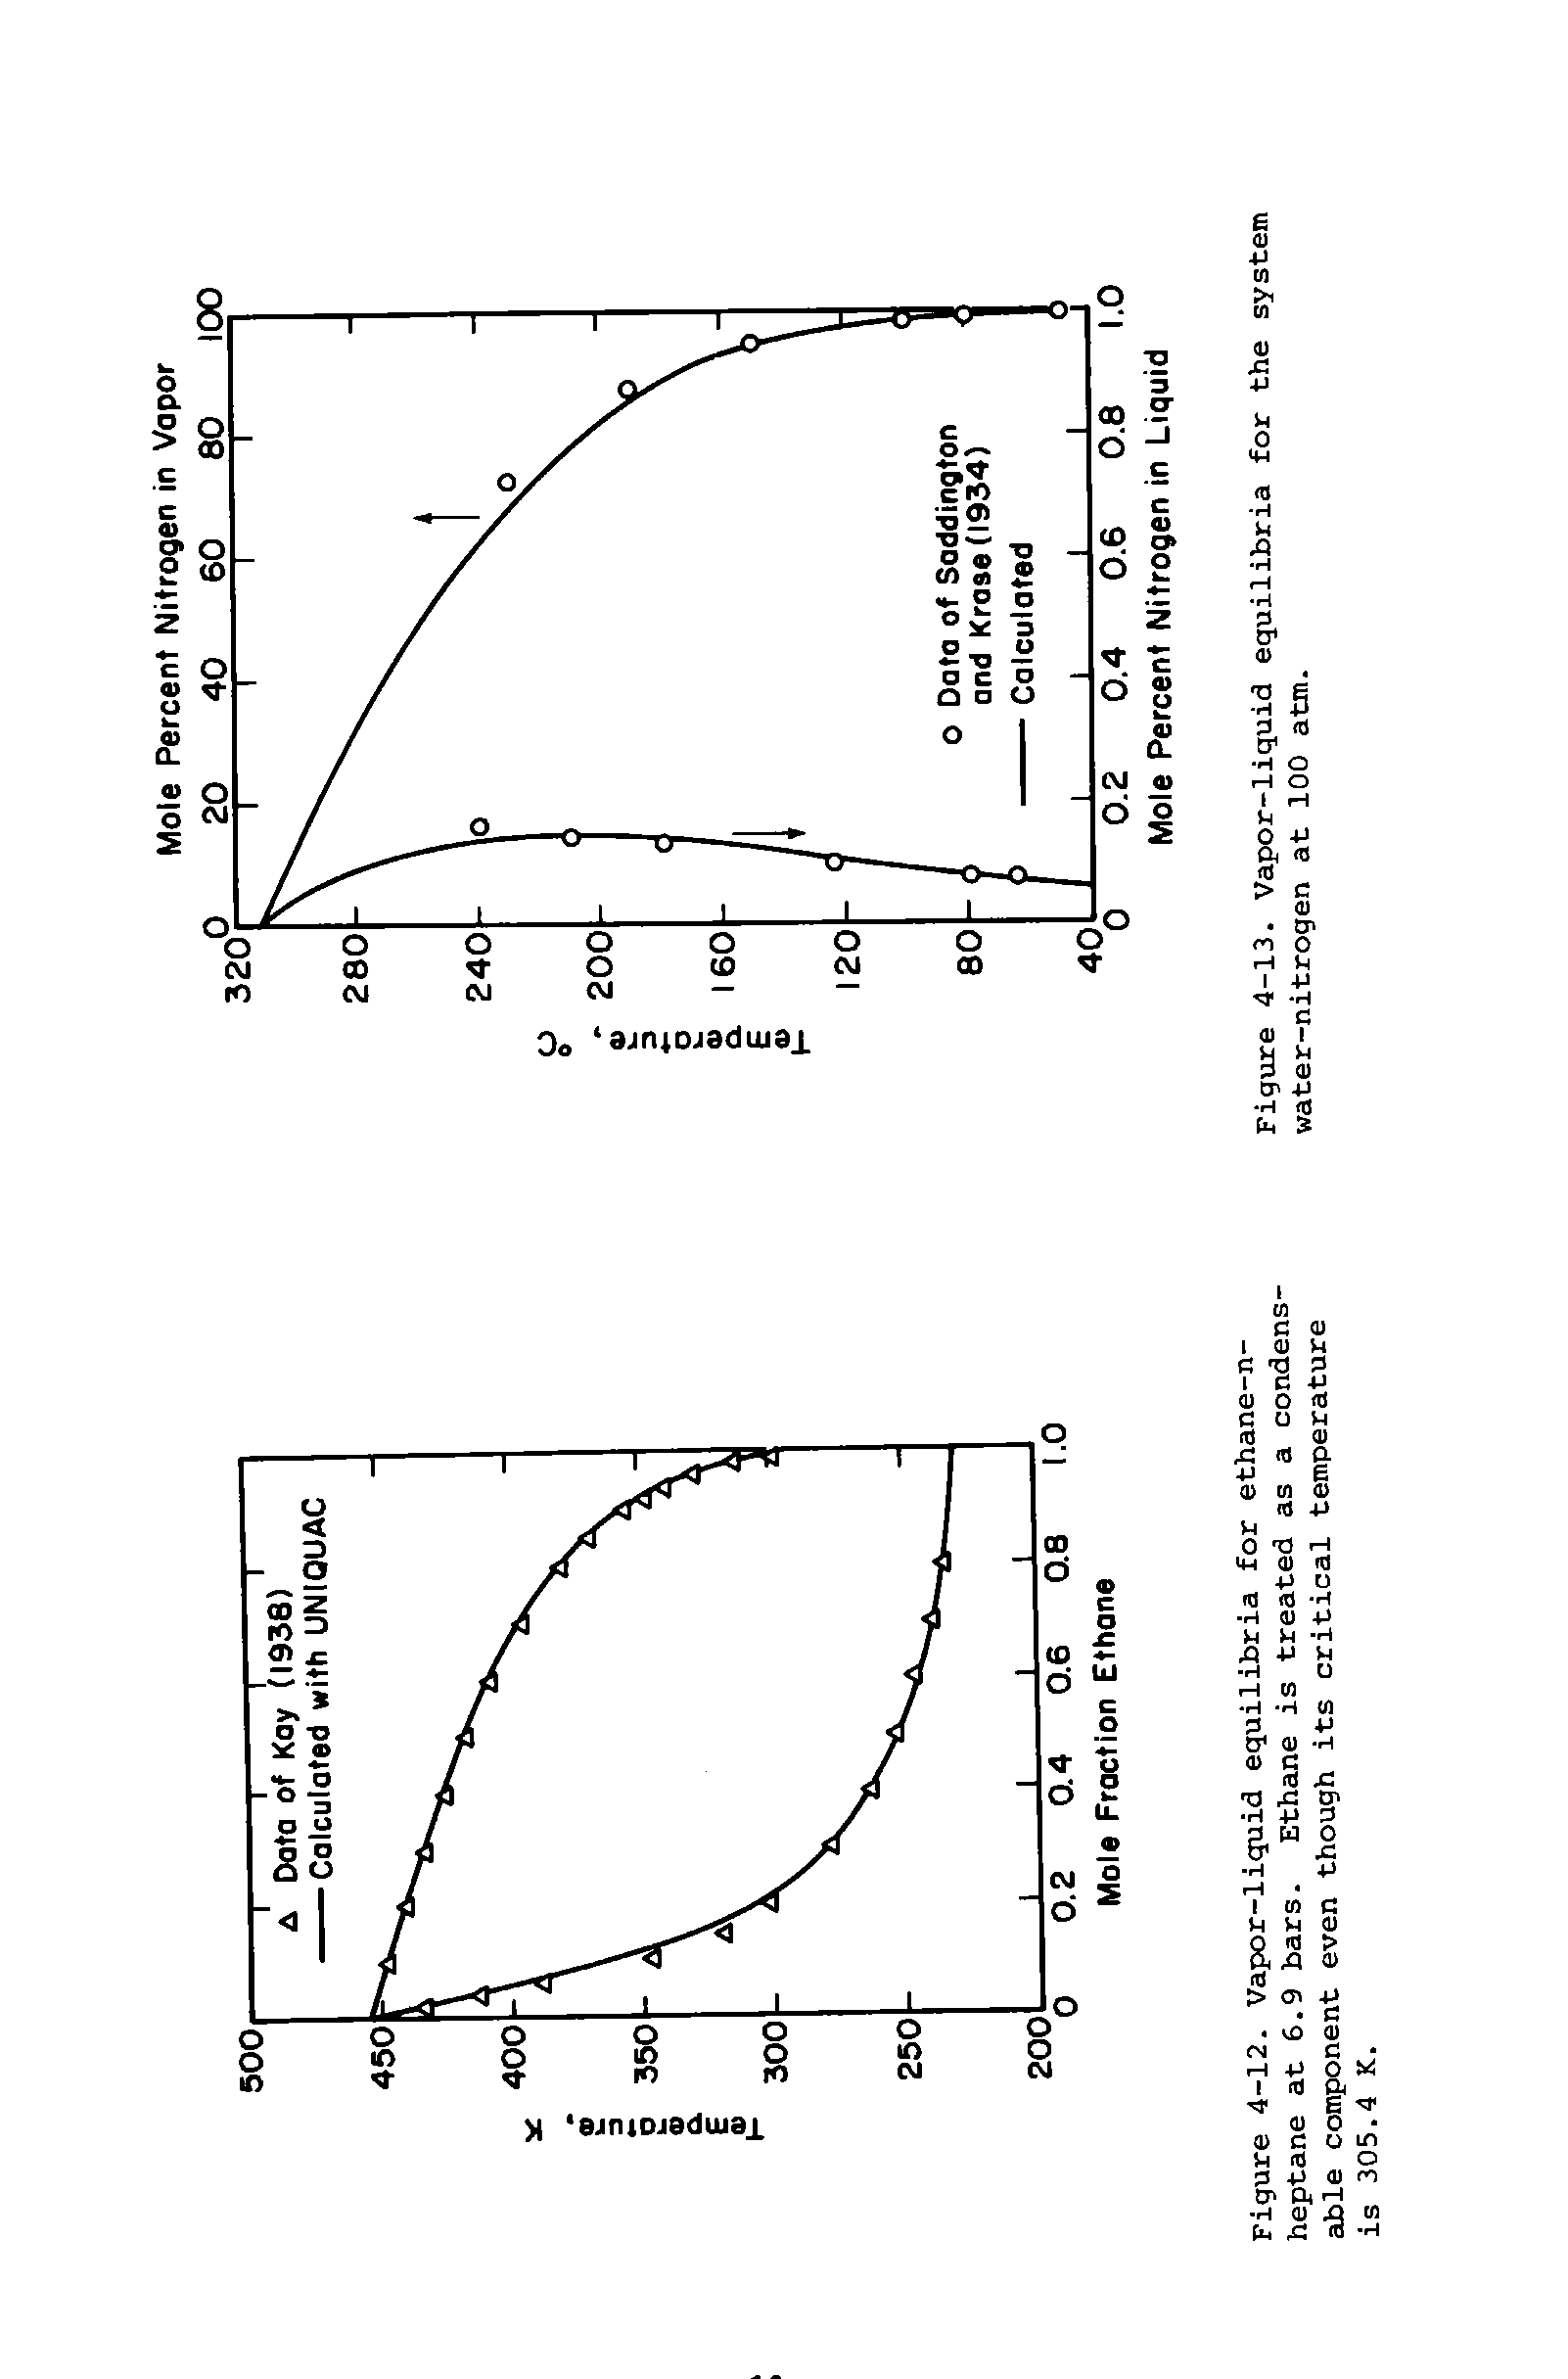 Figure 4-13. Vapor-liquid equilibria for the system water-nitrogen at 100 atm.